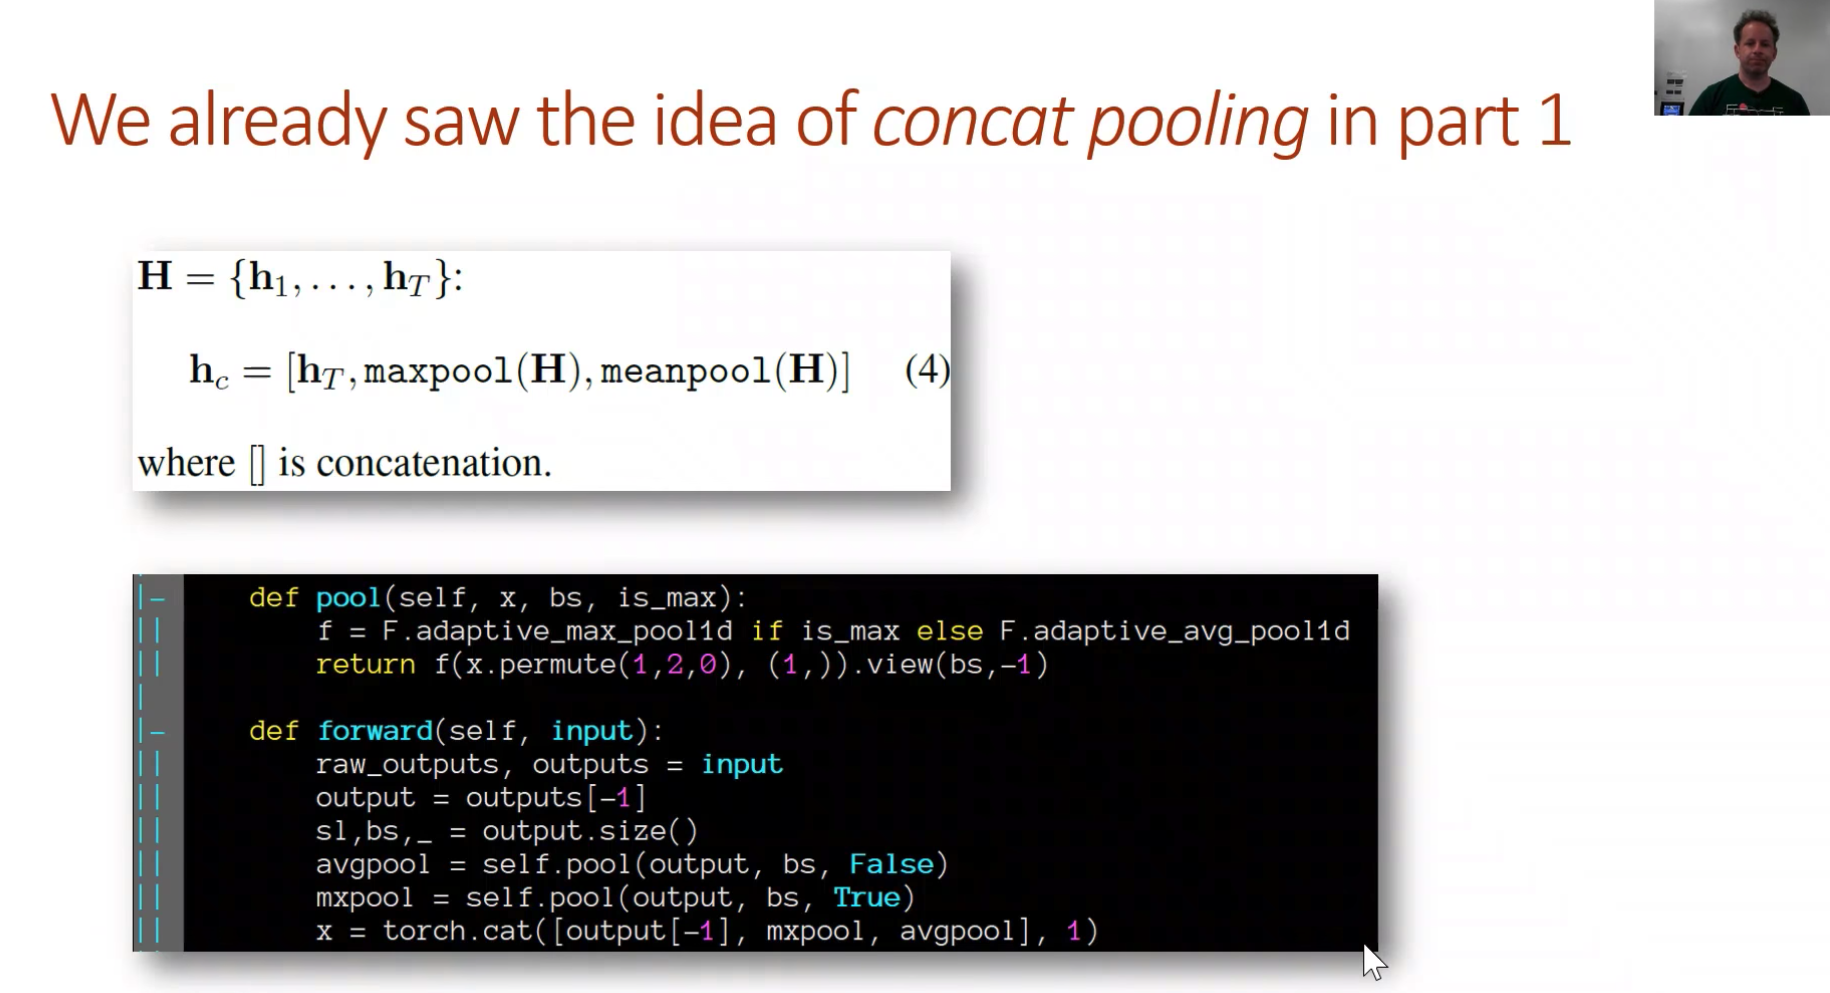 The idea of concat pooling in part 1